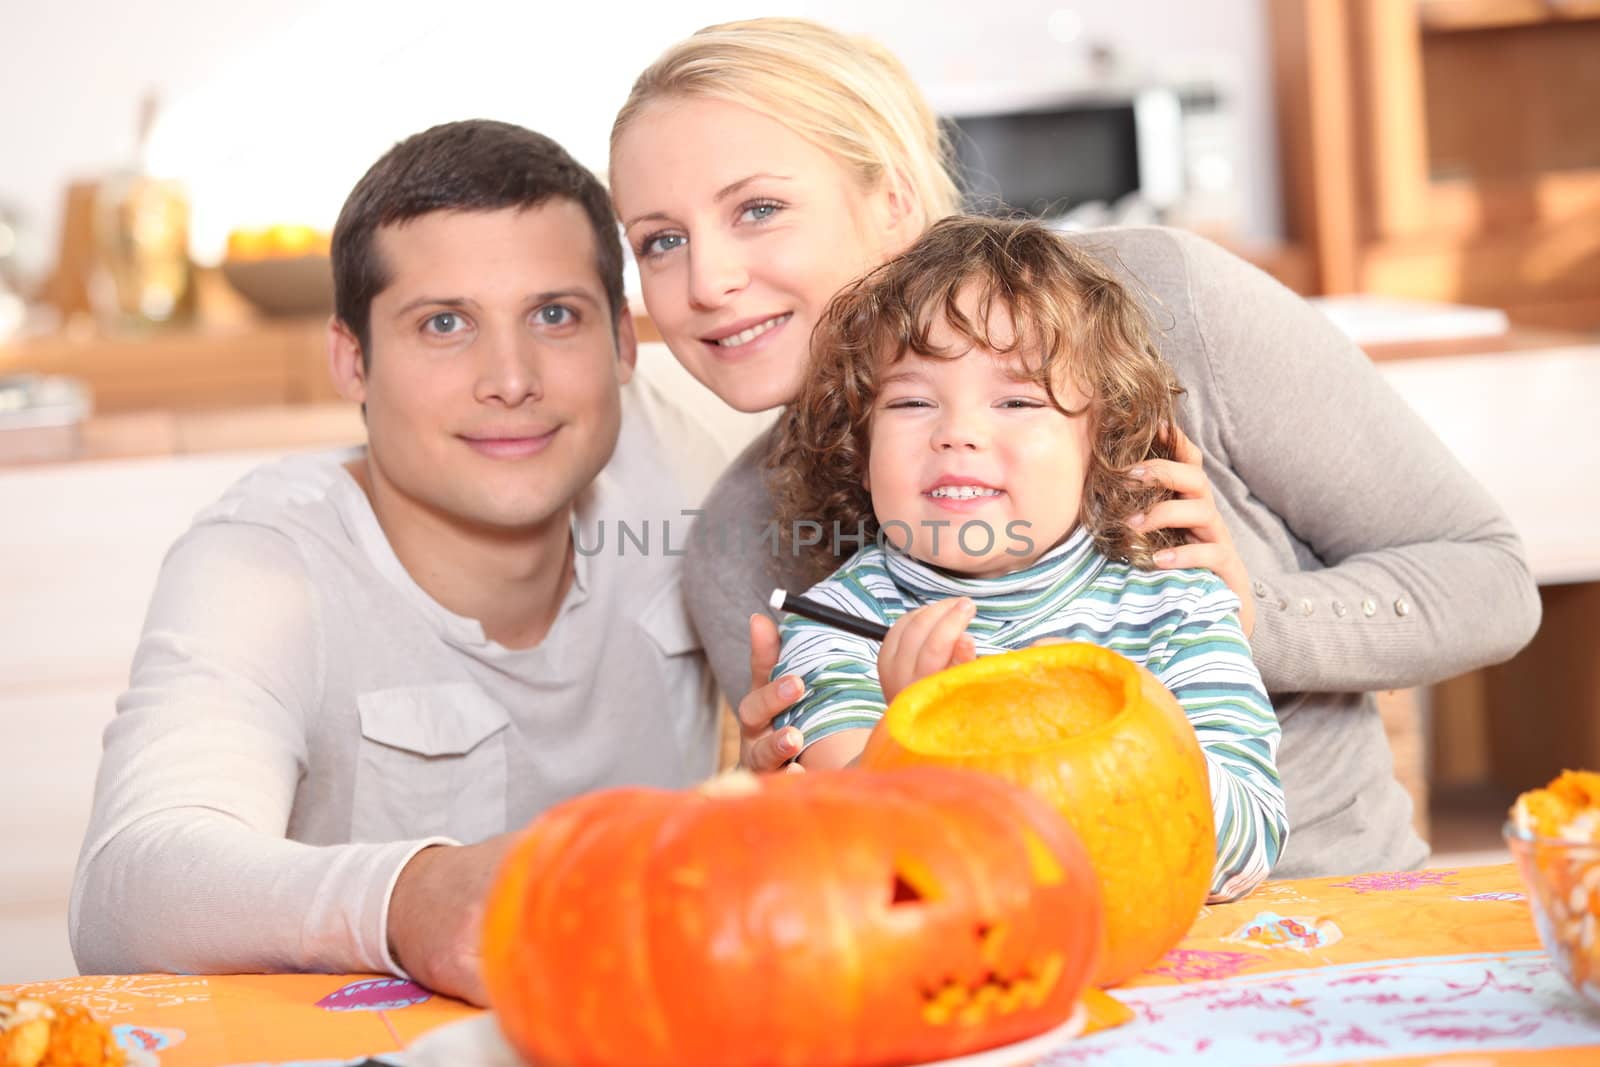 Family carving a pumpkin together by phovoir